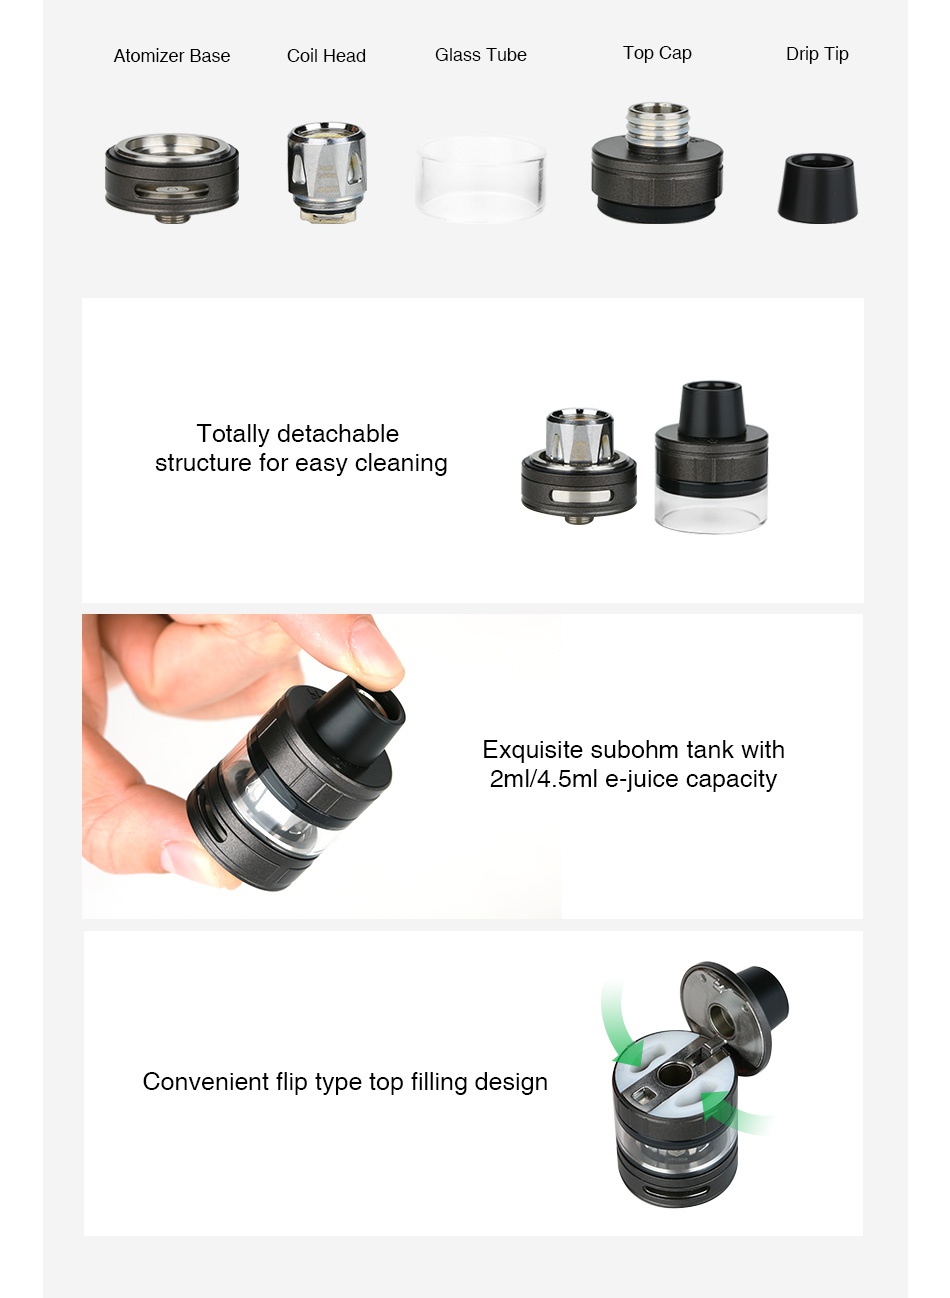 Joyetech ProCore X Atomizer 2ml Coil head Glass Tube op cap Drip I ip Totally detachable structure for easy cleaning Exquisite subohm tank with 2ml 4 5ml e juice capacity Convenient flip type top filling design